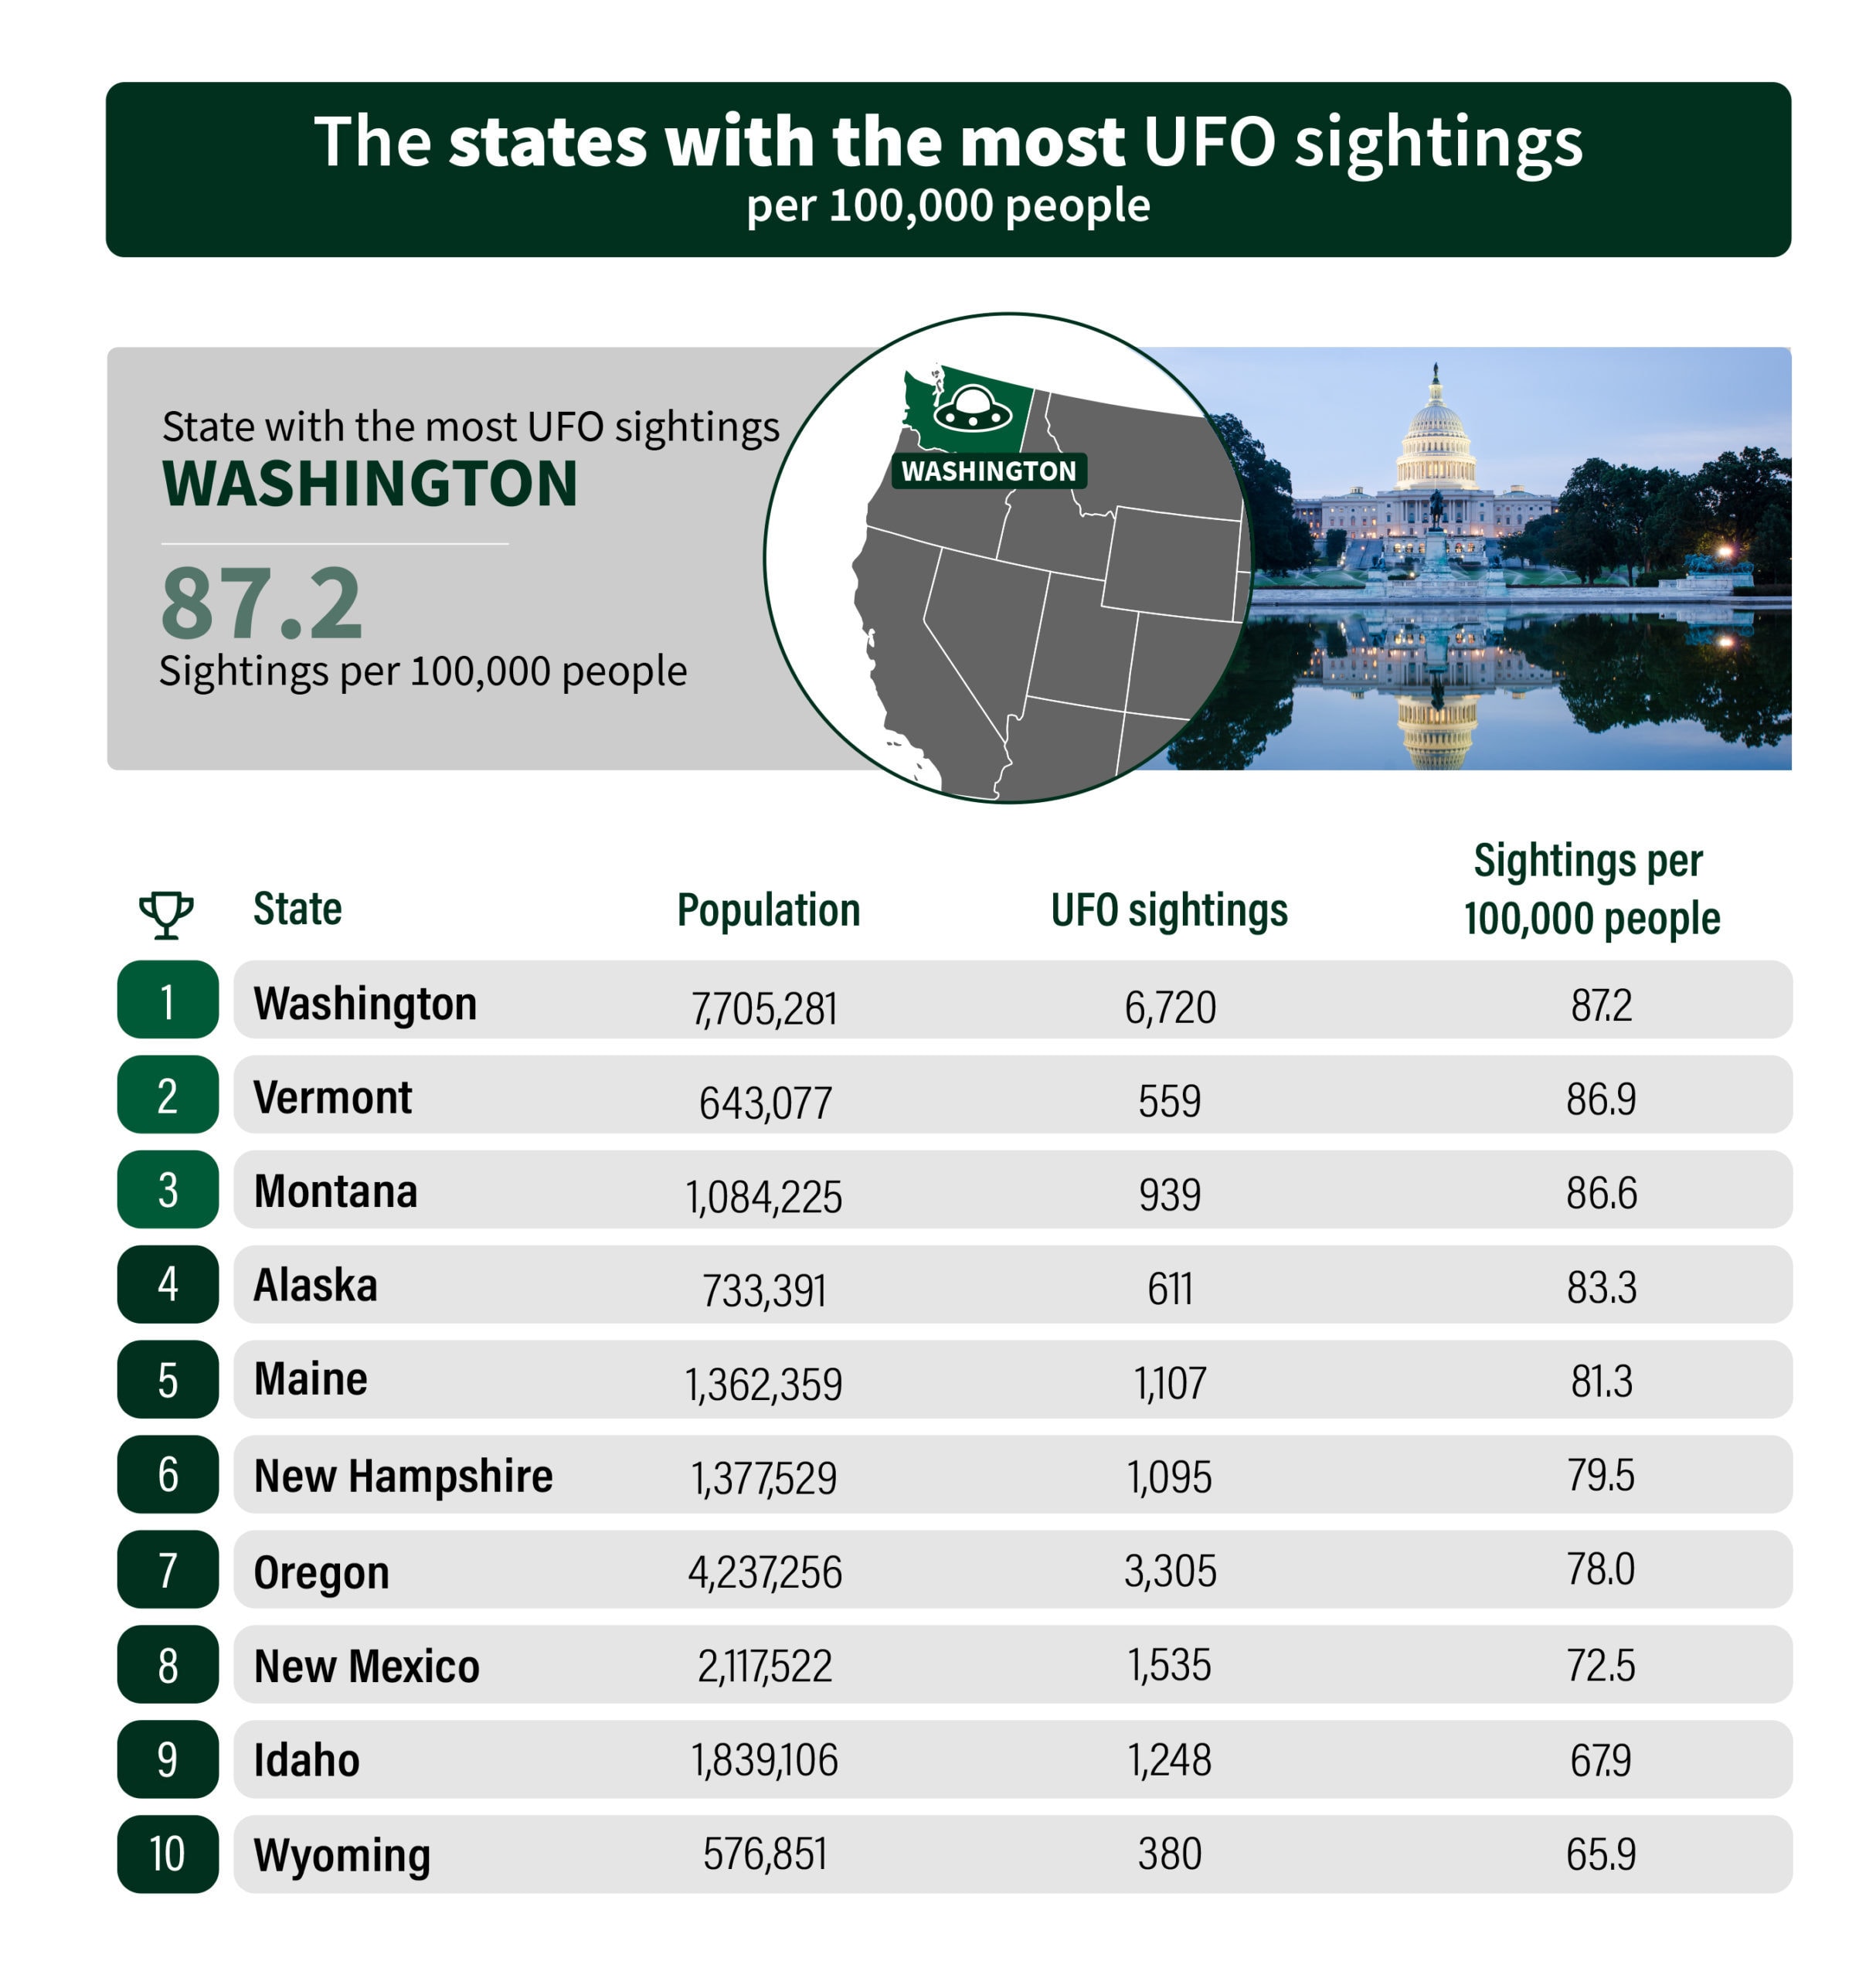 infographic about the states with the most UFO sightings or extraterrestrial encounters in the USA per 100,000 people